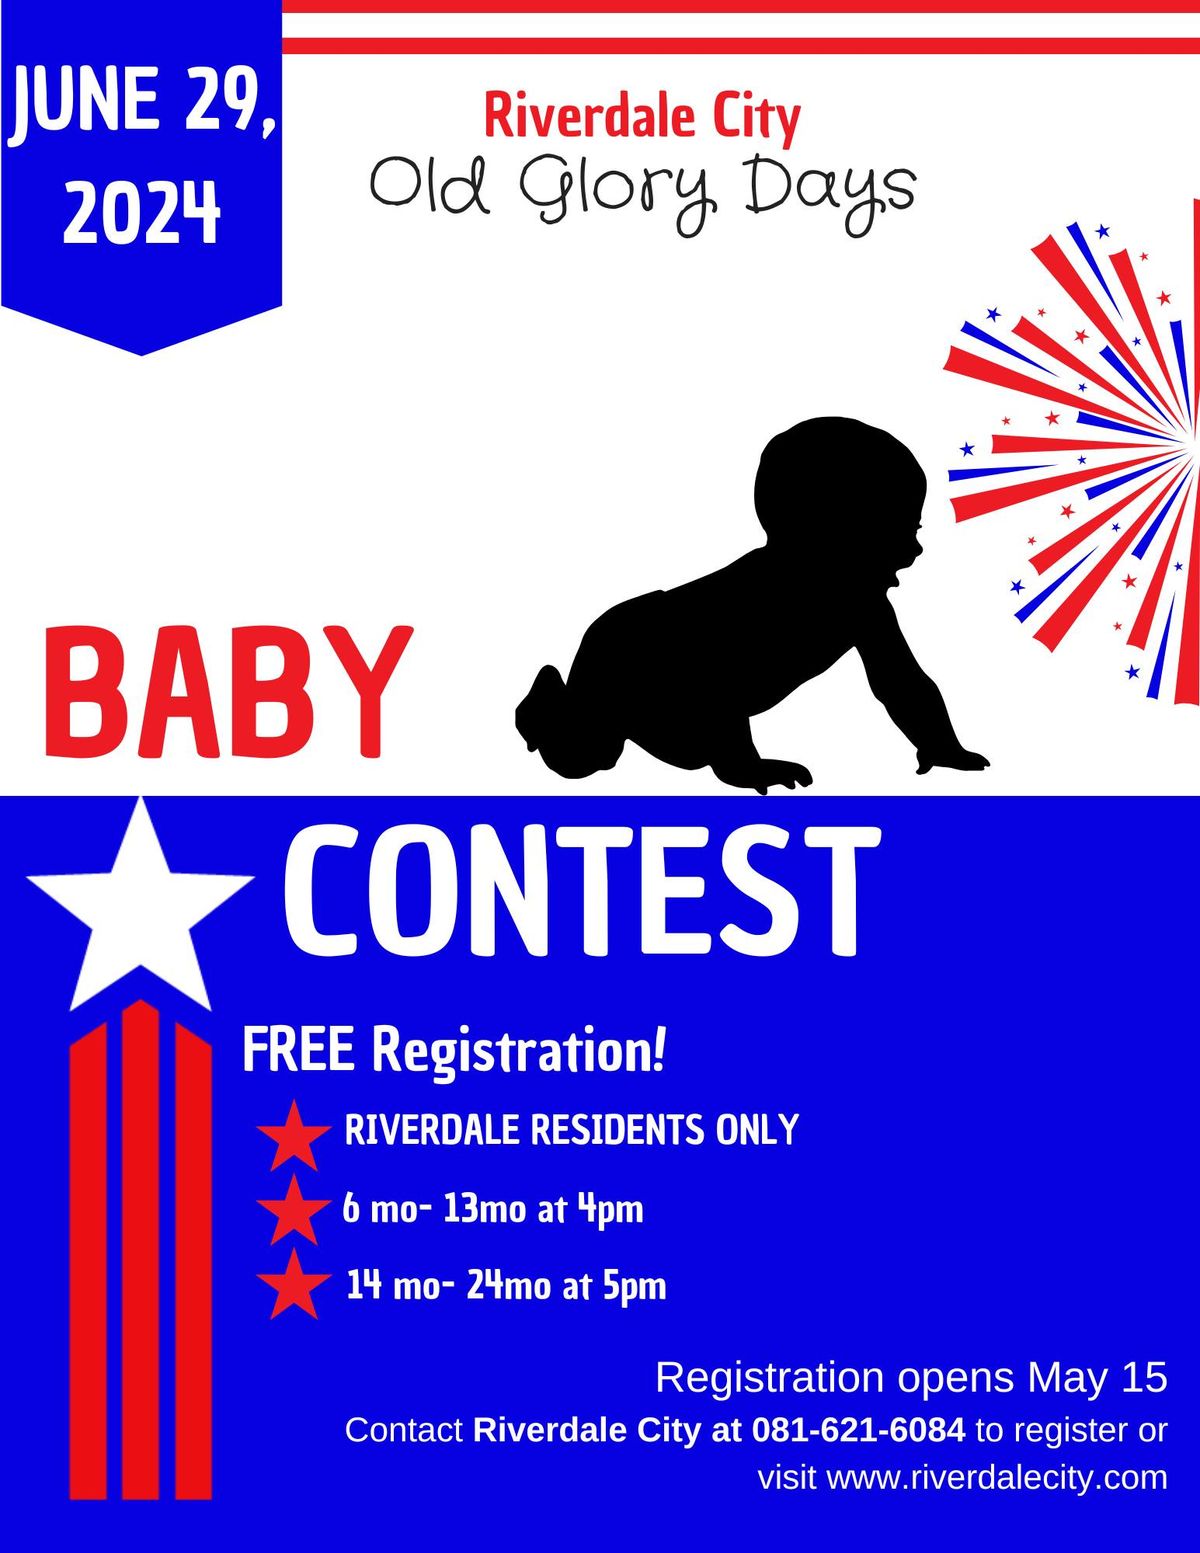 Old Glory Days Baby Contest